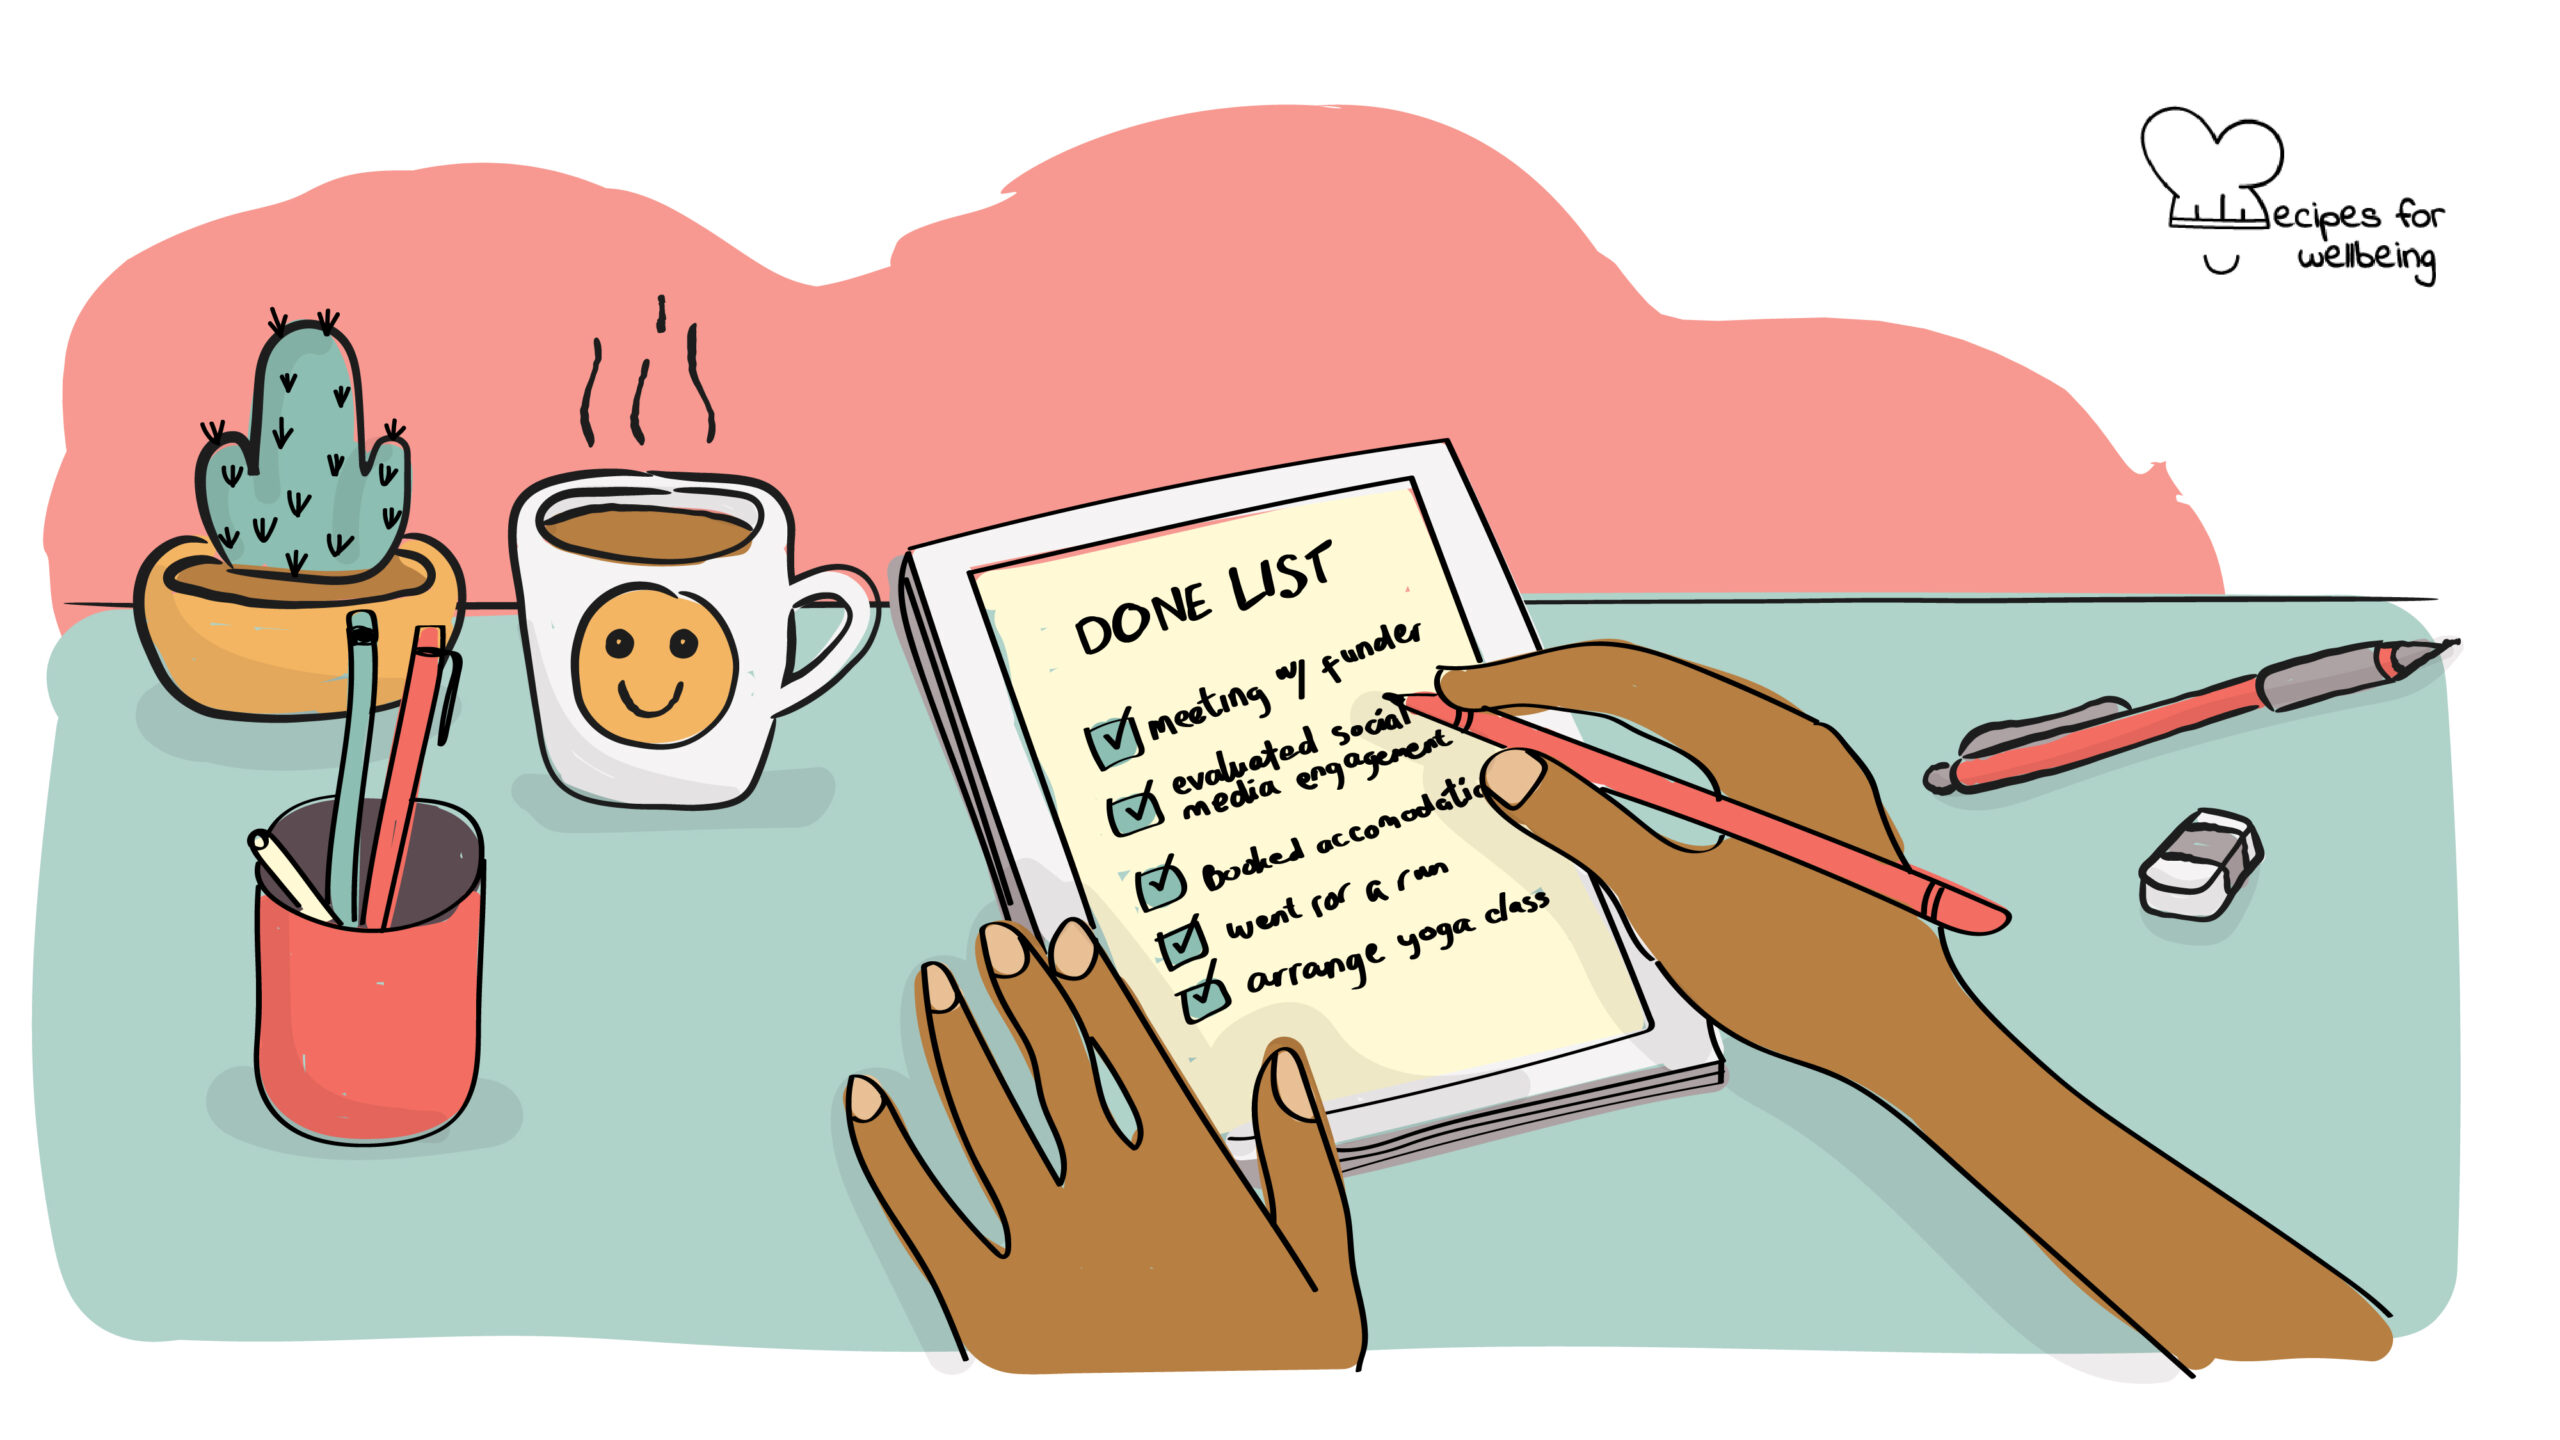 Illustration of a person's hands completing a "done list" of tasks. © Recipes for Wellbeing